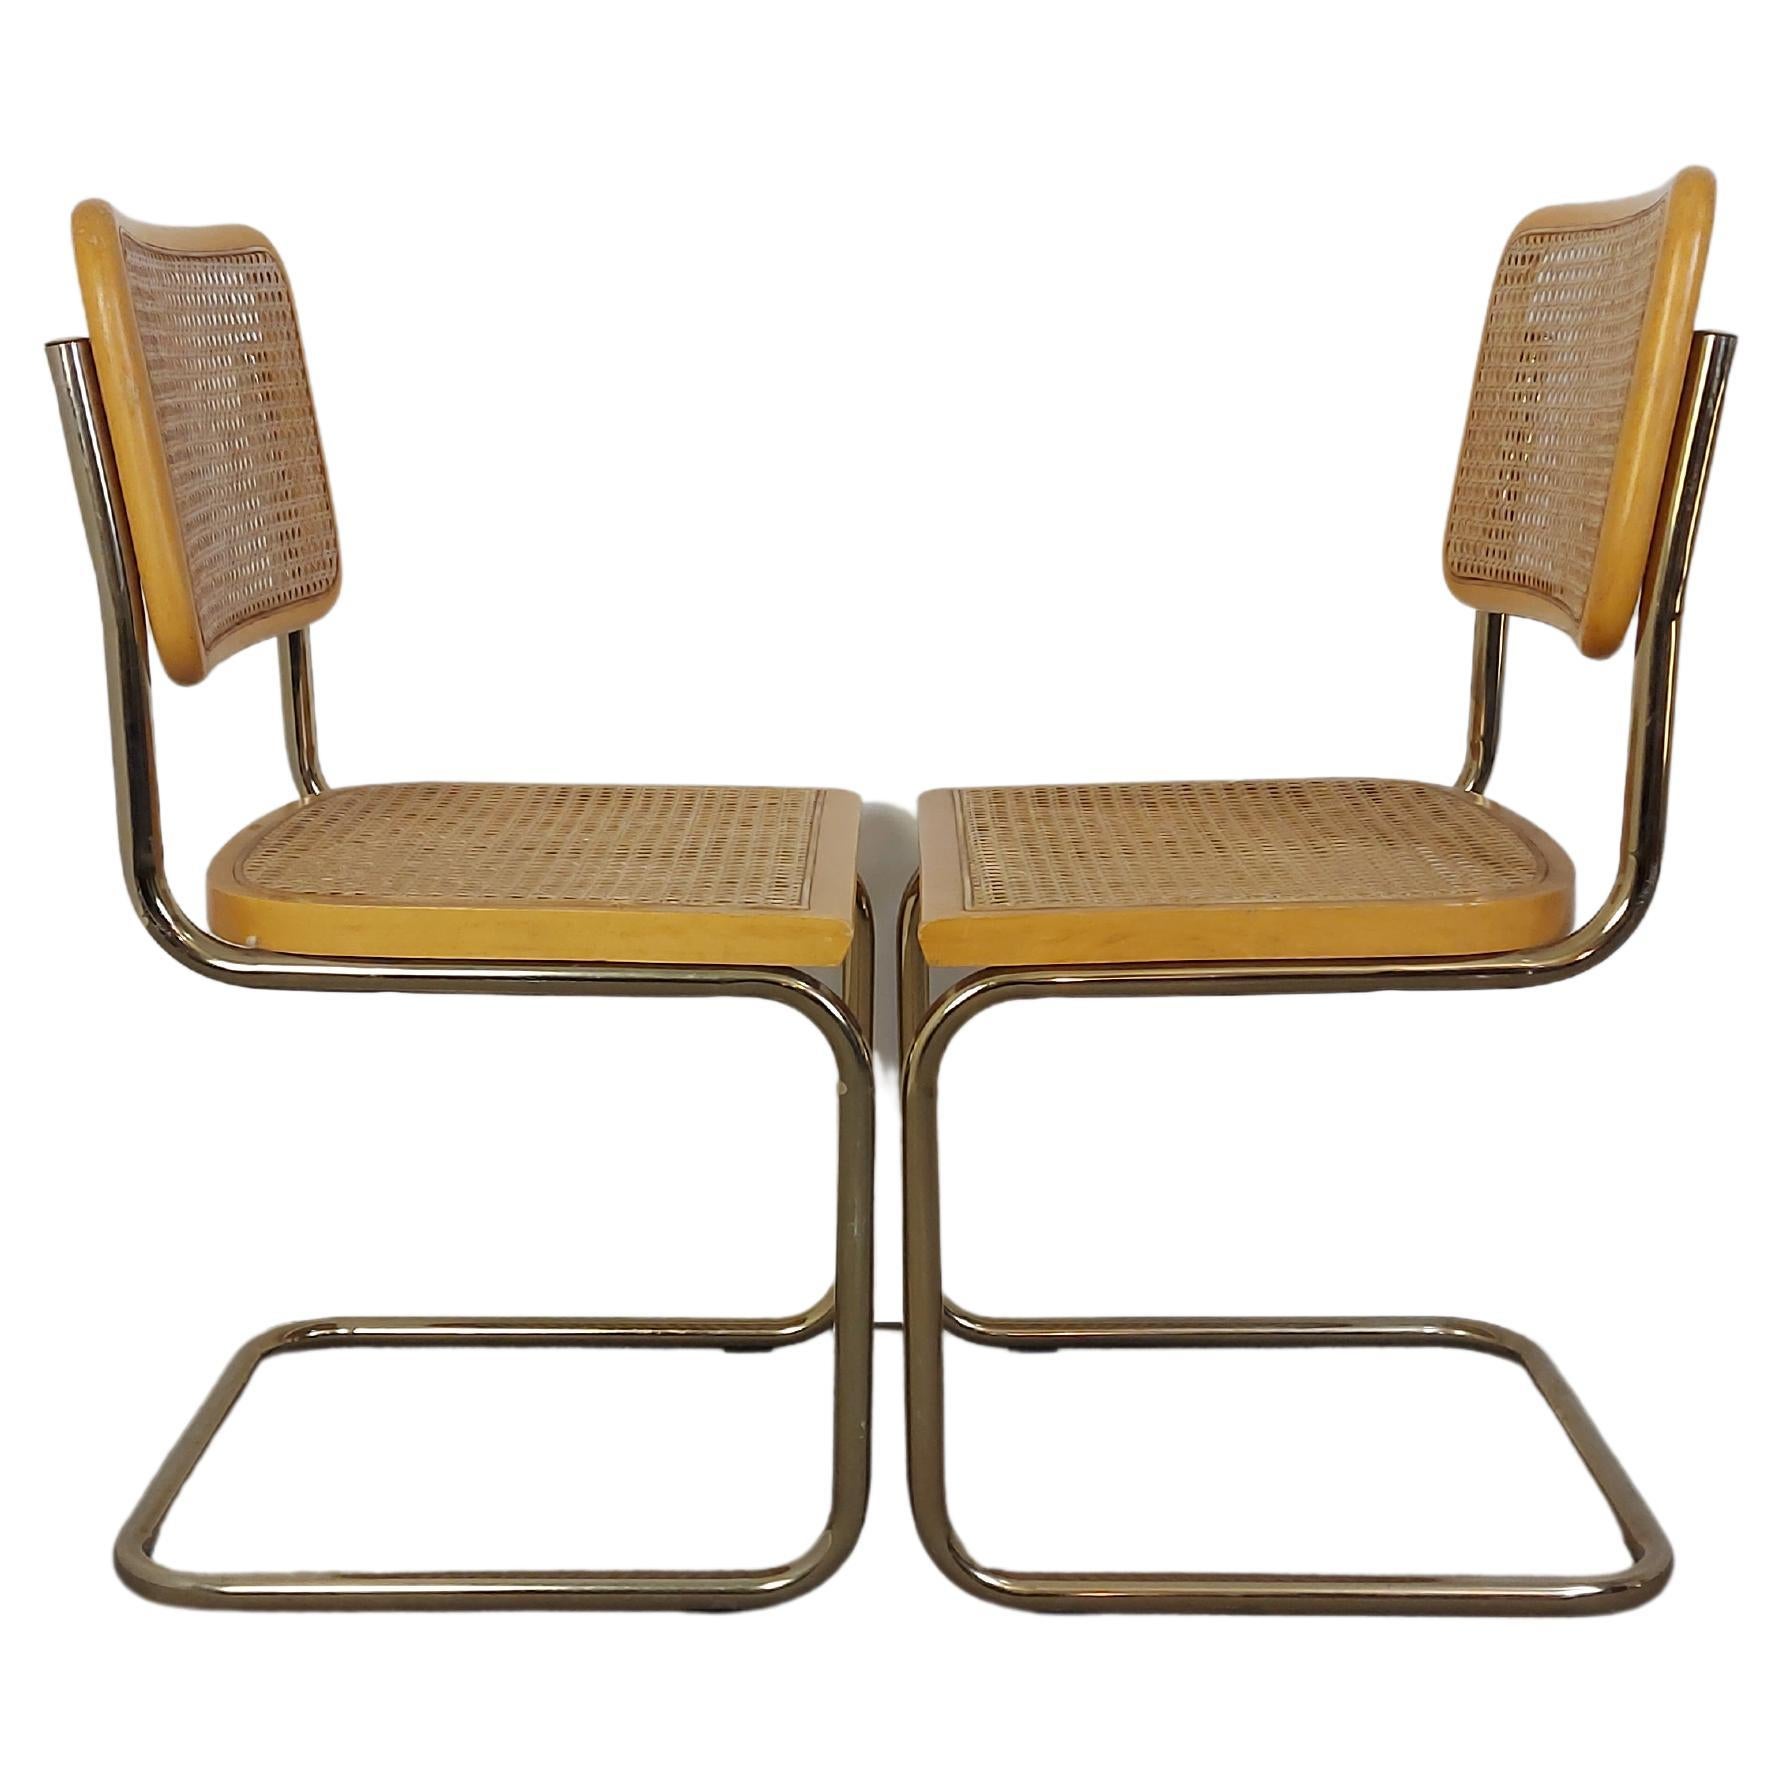 CESCA Chair, 1980s, Pair Design Classic with Gilded Frame